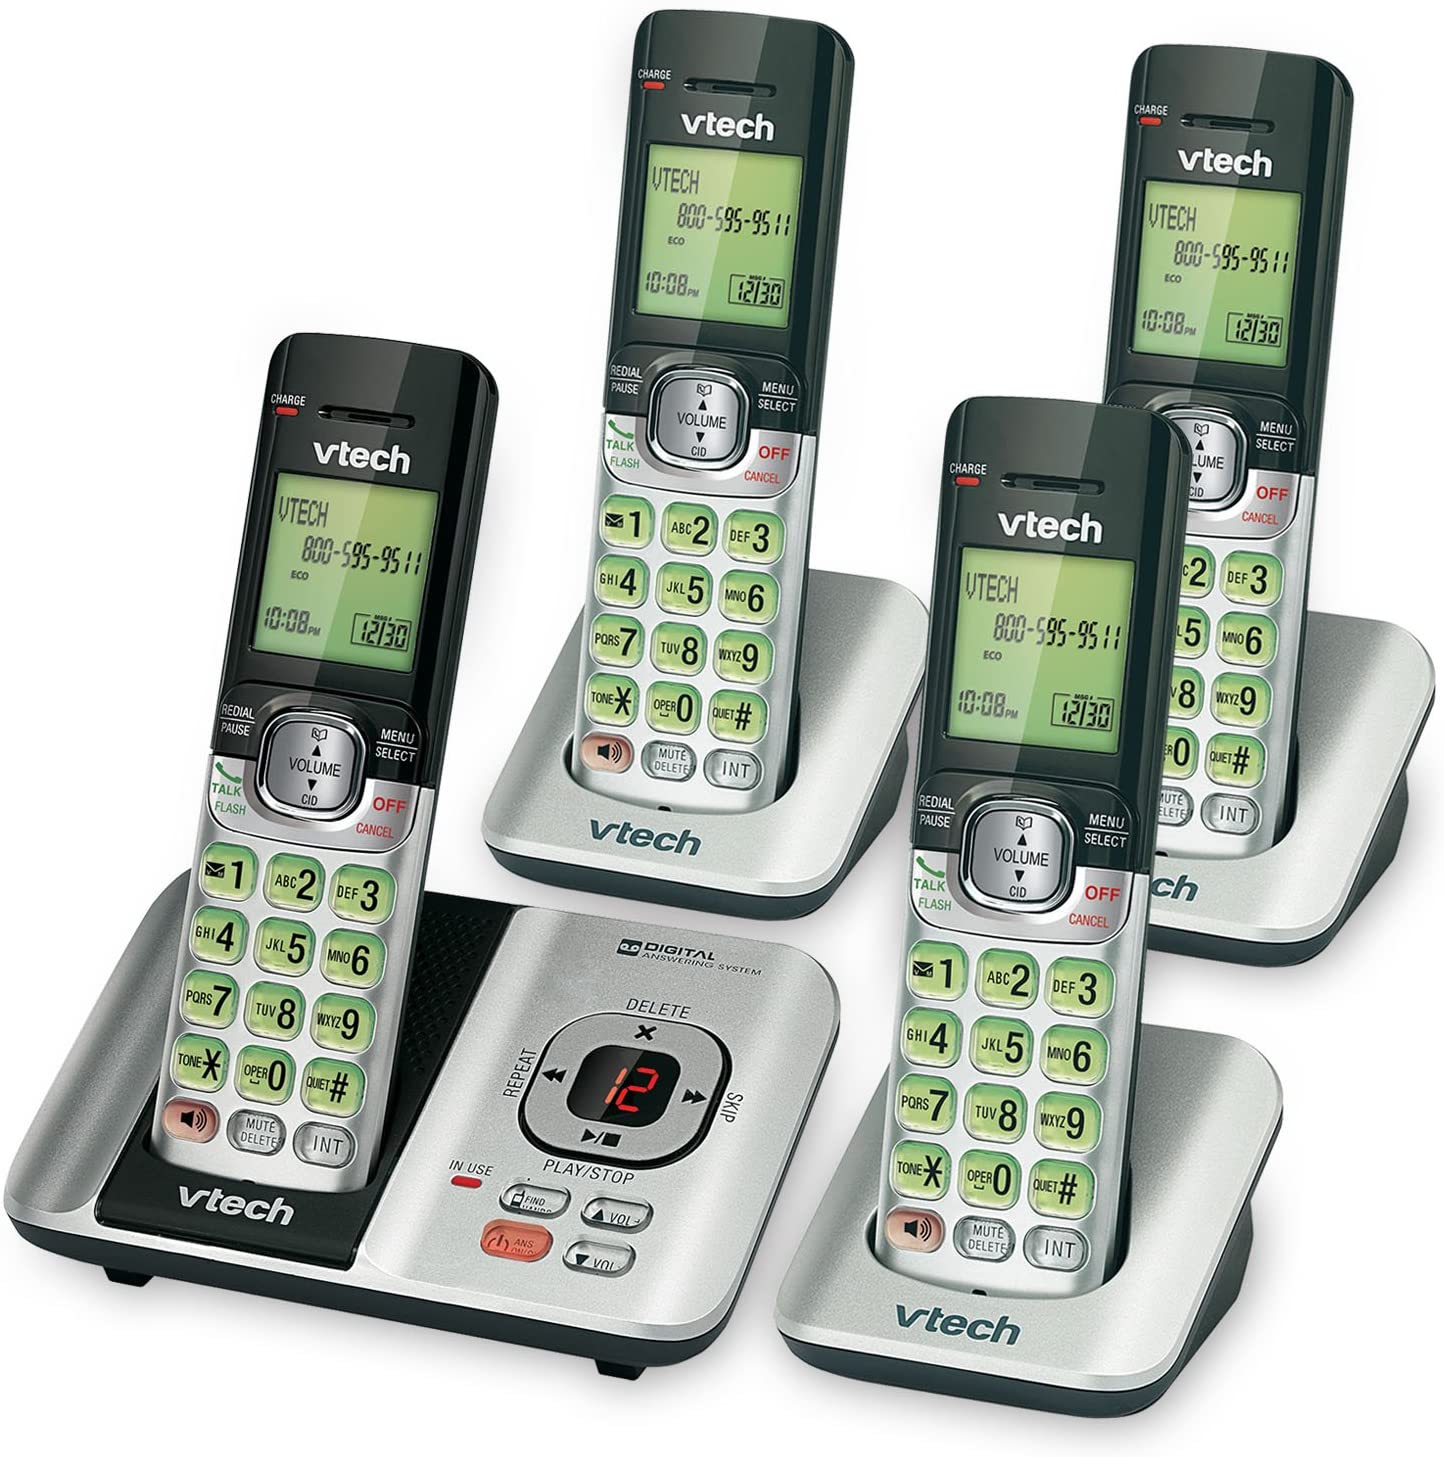 VTech CS6529-4 DECT 6.0 Phone Answering System, Silver/Black - with Caller ID/Call Waiting, 4 Cordless Handsets